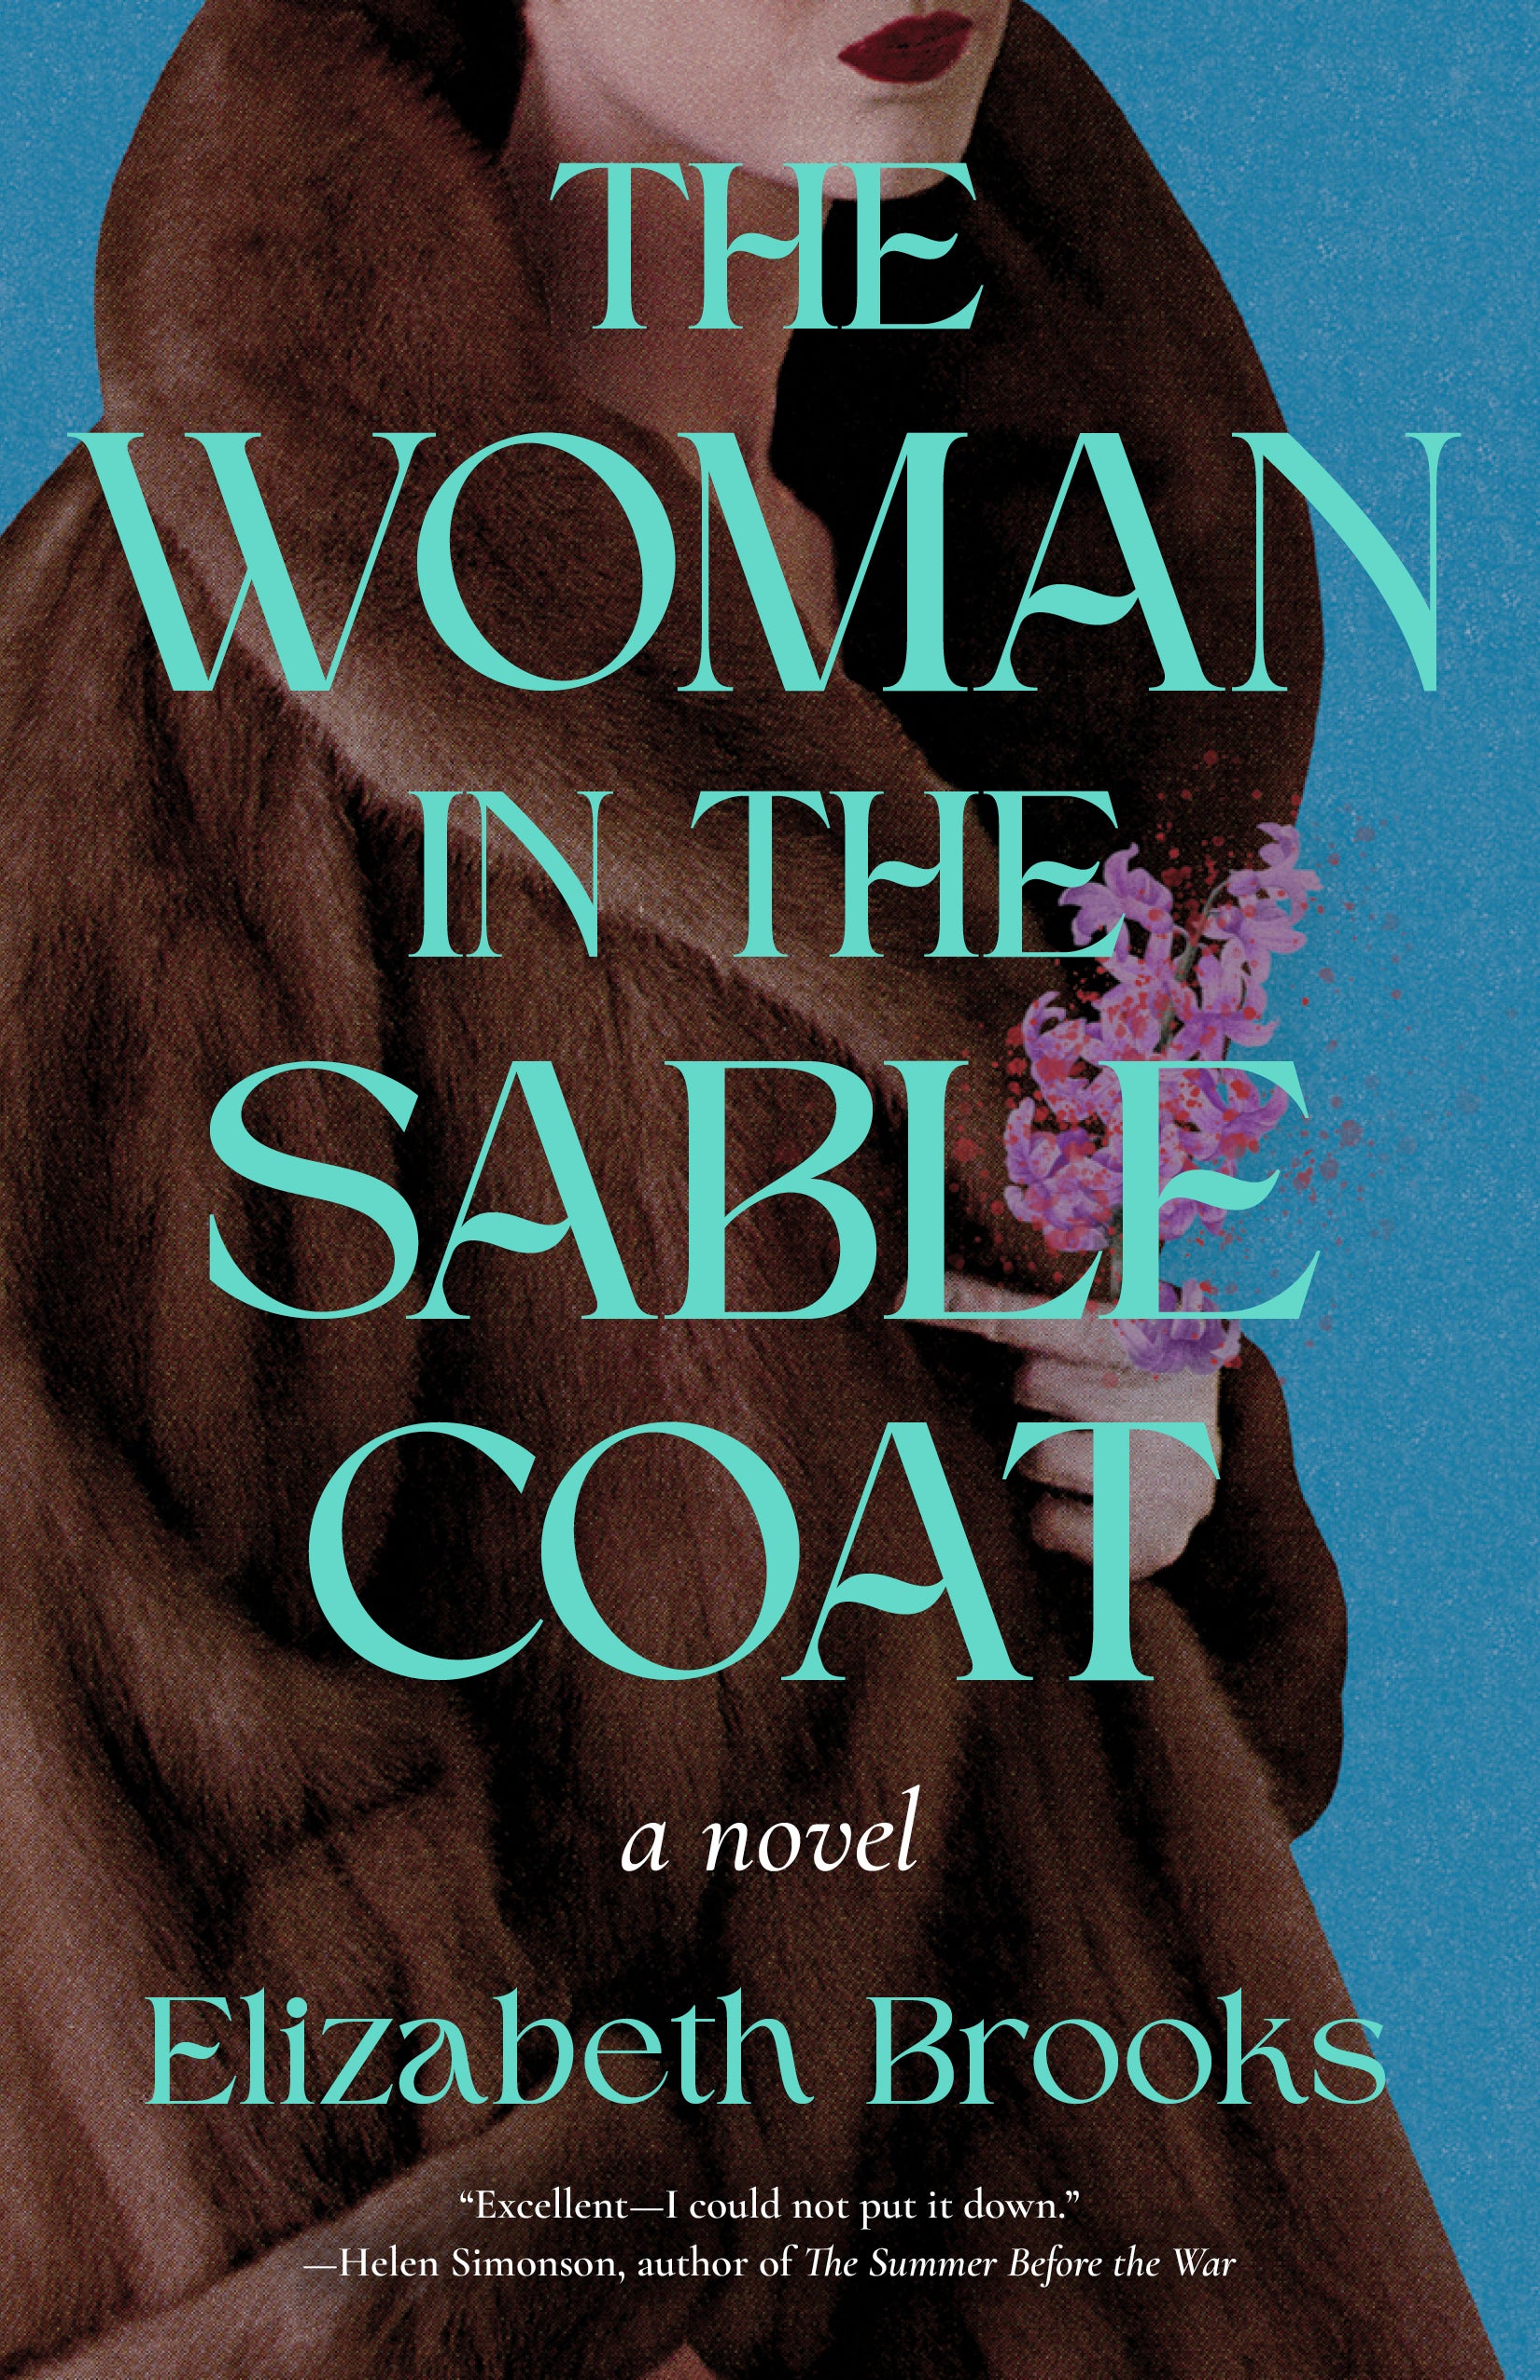 Book Review - The Woman in the Sable Coat